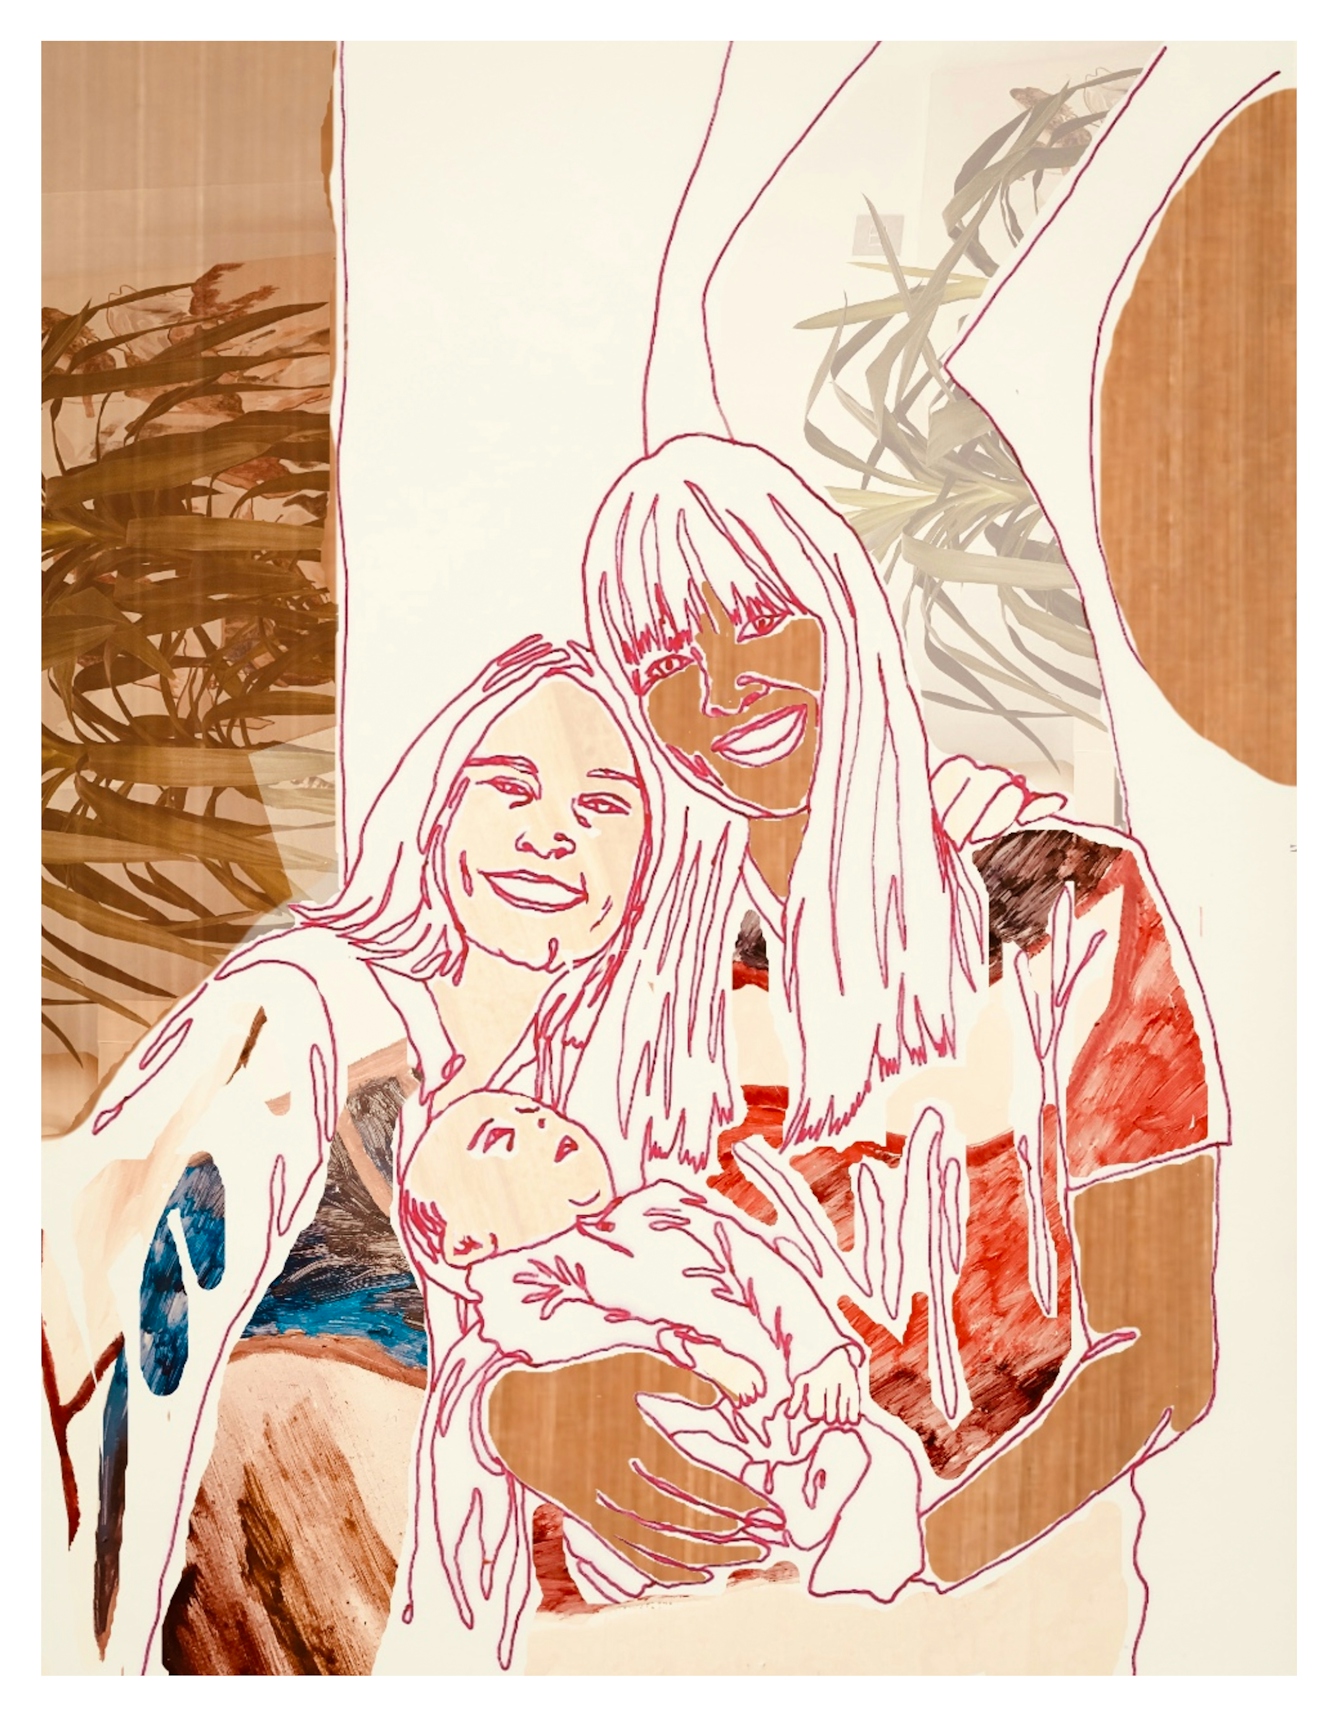 Digital artwork made up of collage elements, line drawing and textured patterns. The artwork depicts a family unit made up of two women leaning in together their heads touching, smiling and looking out at the viewer. In the arms of one of the women is a small baby who is gazing up at them both. The tones of the artwork are creams, rusts, browns and reds.